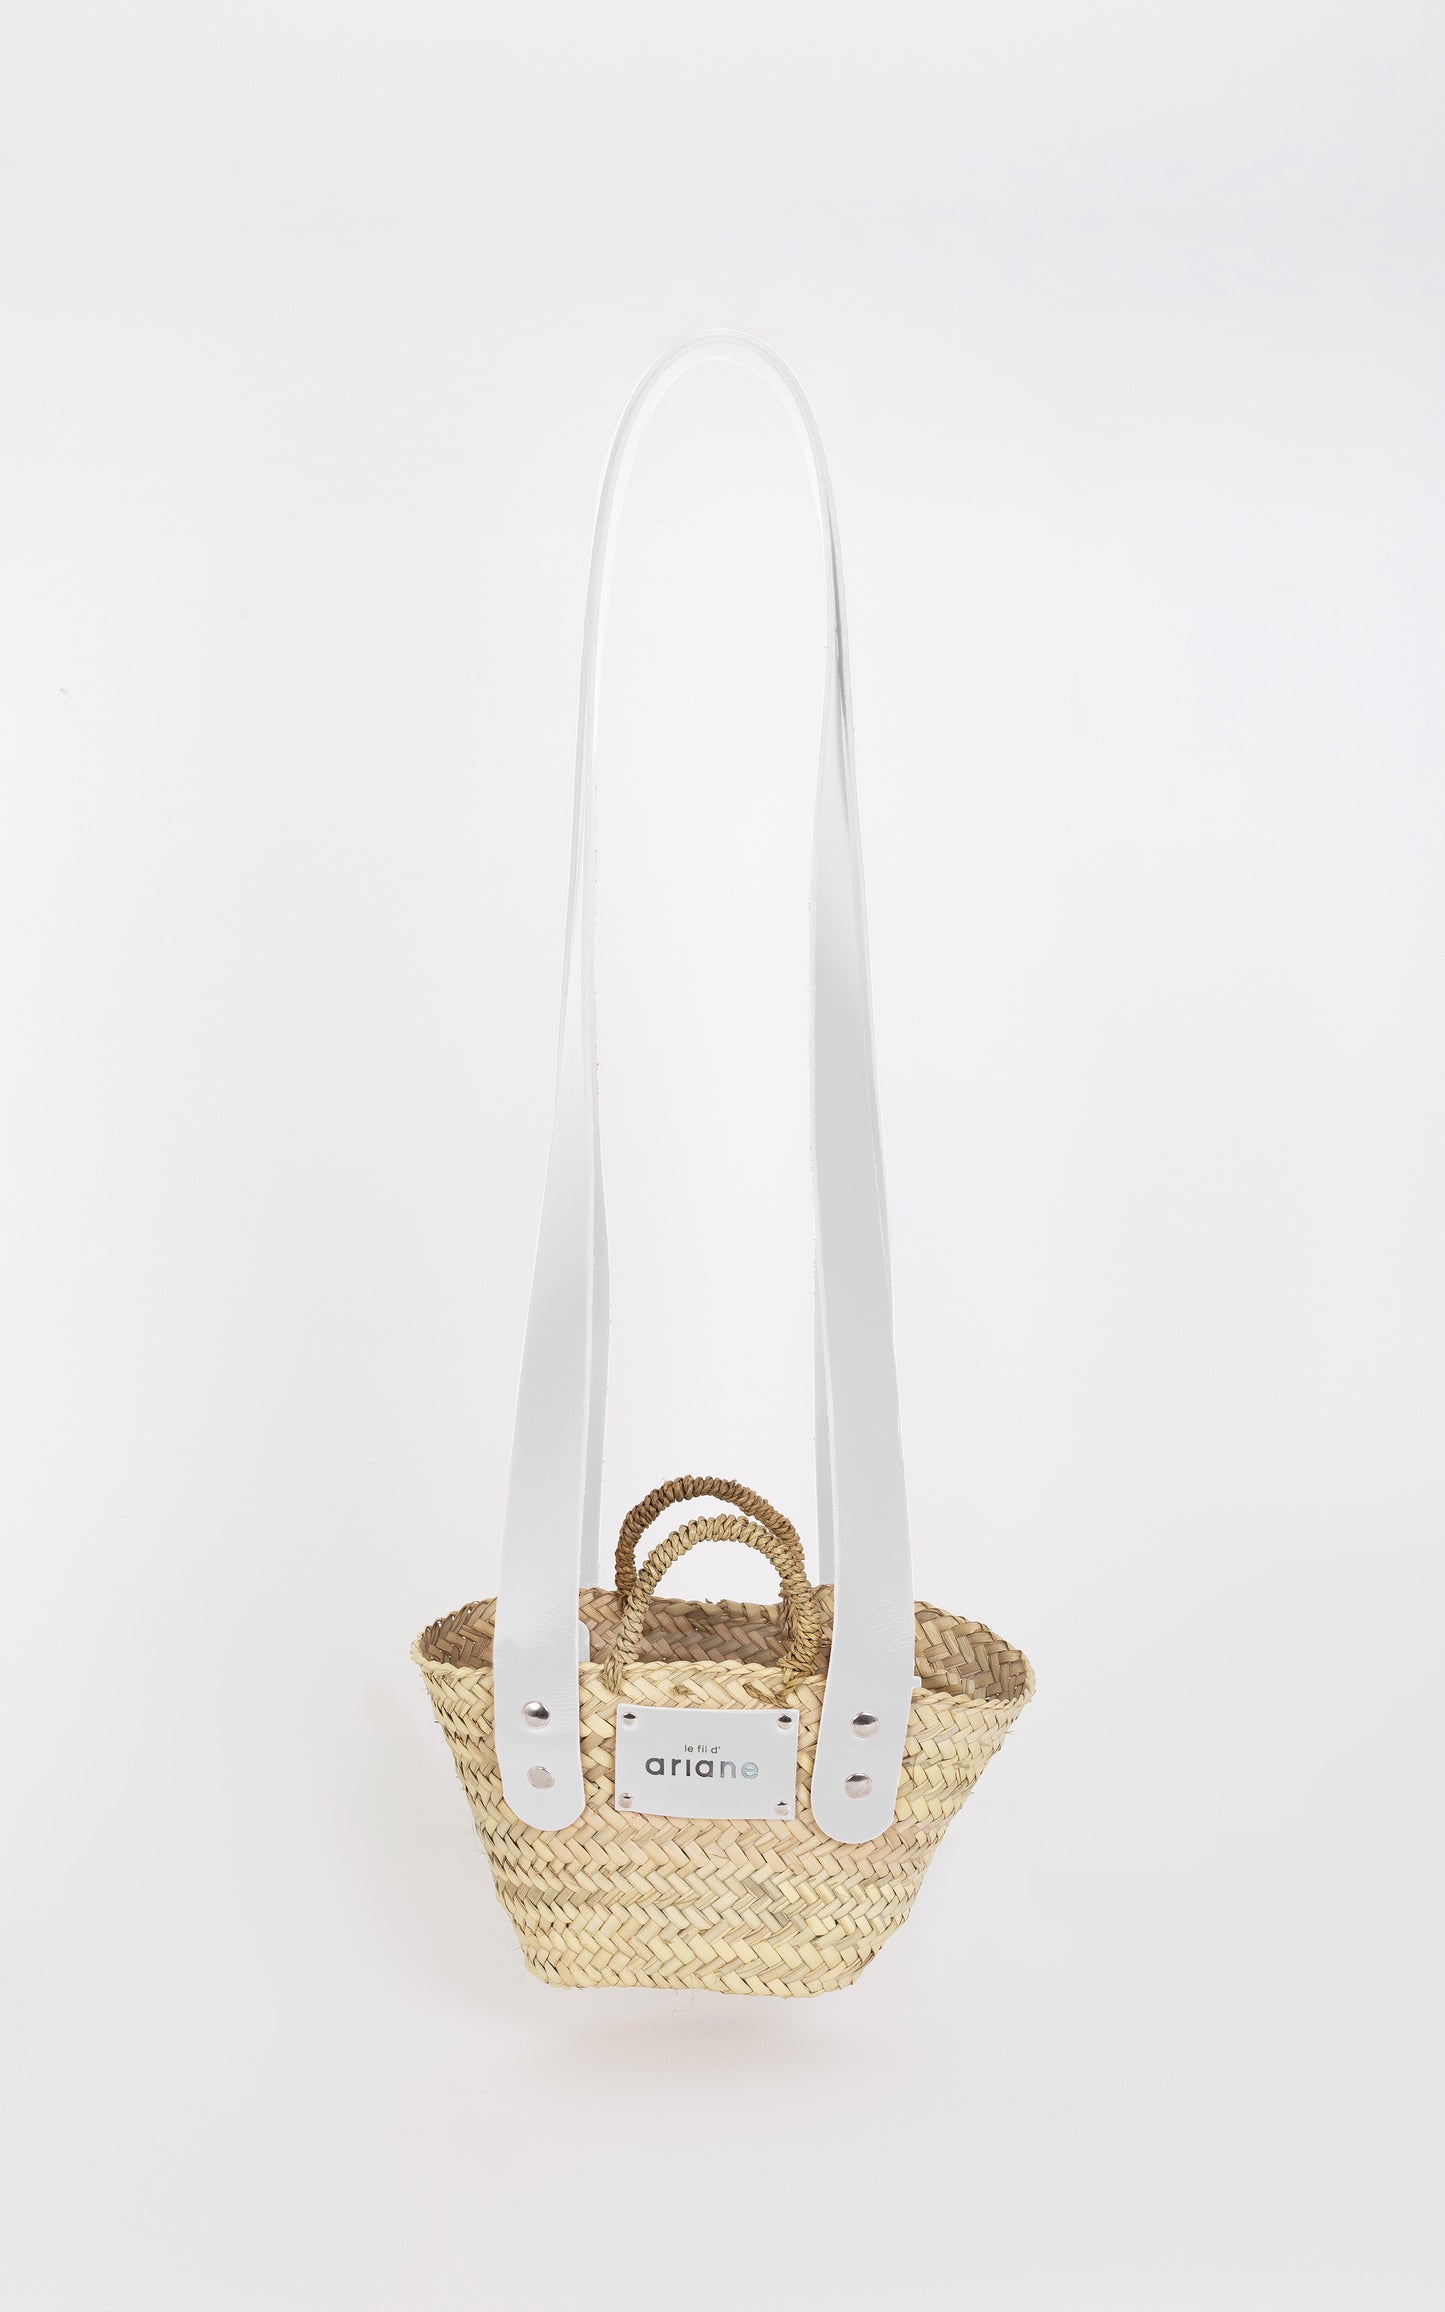 THESEE basket - Size XS - Wide white handles